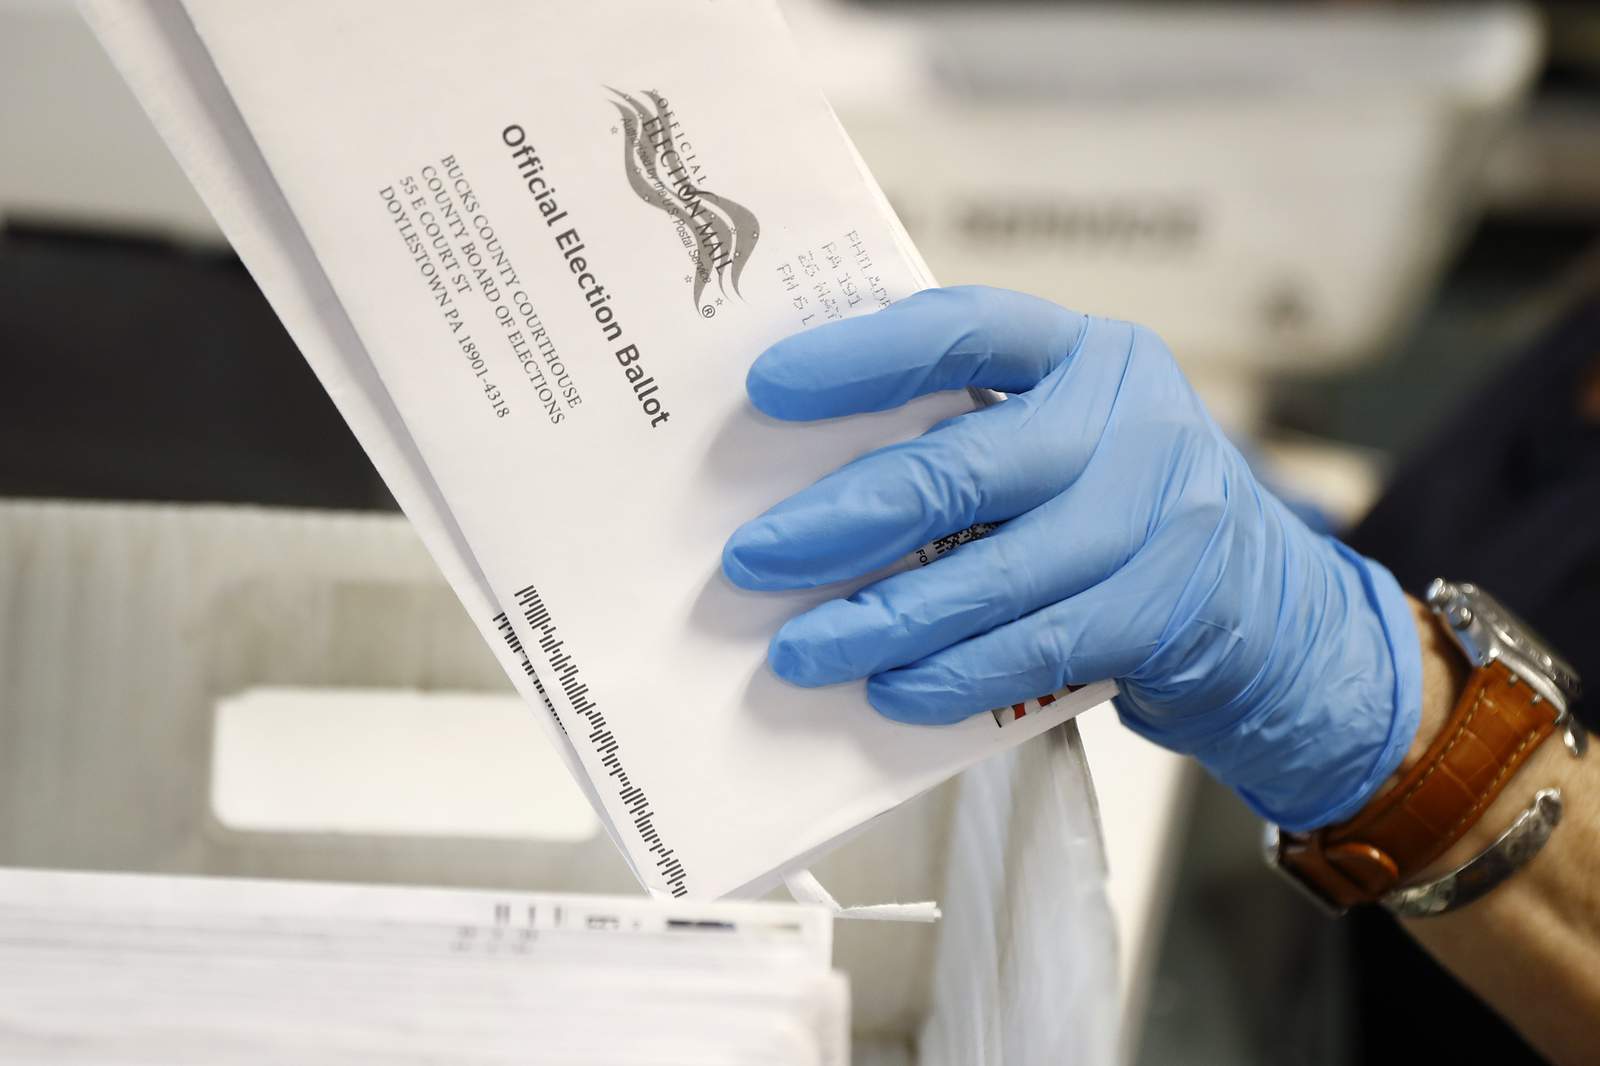 Florida to allow early mail-in ballots due to COVID-19 concerns, report says